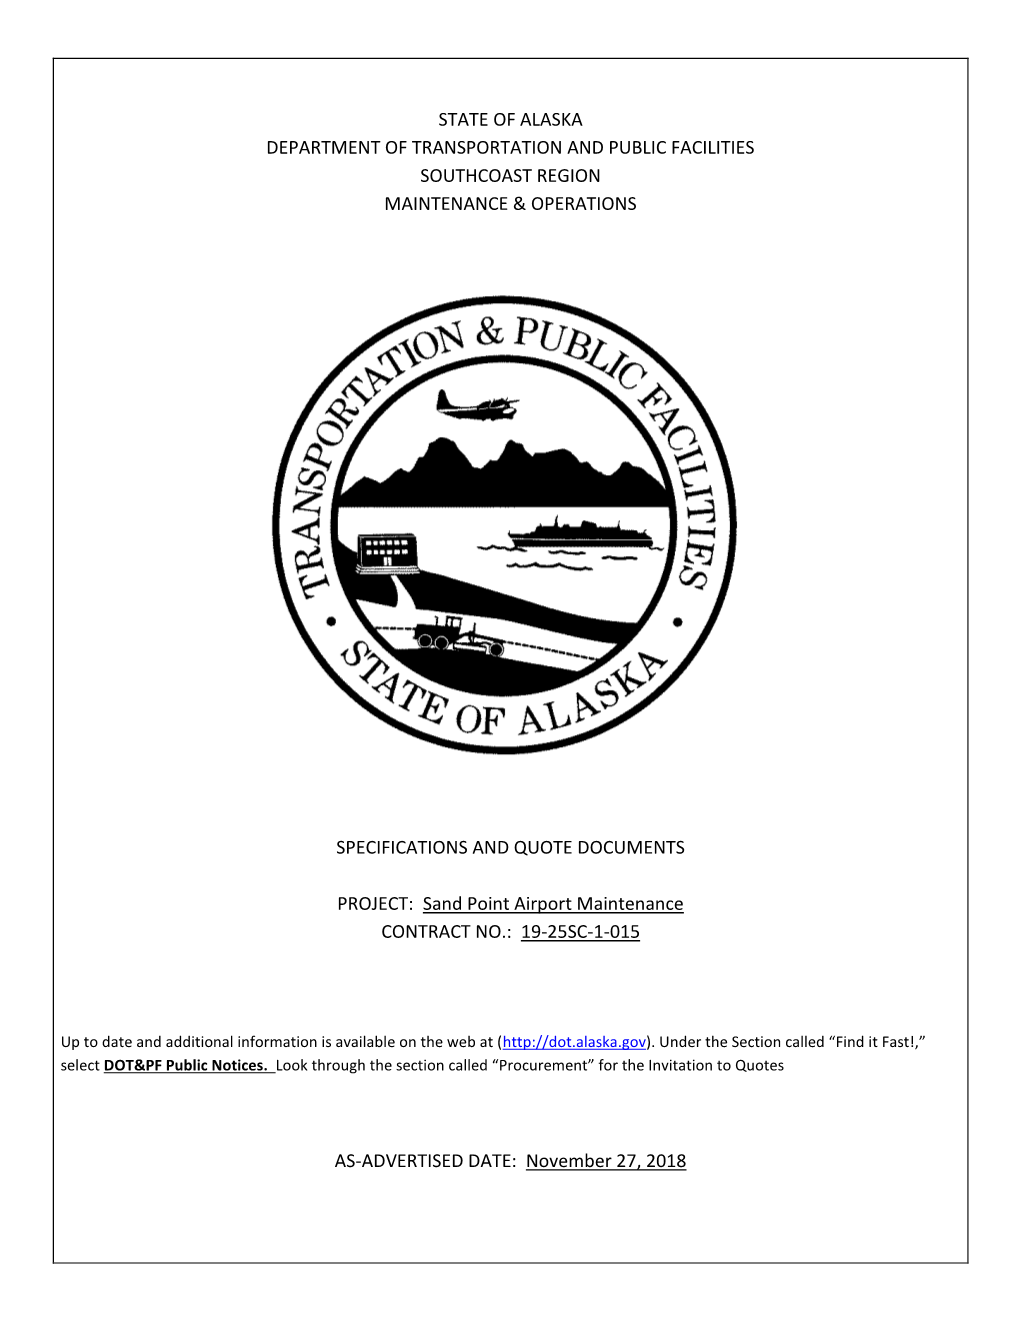 State of Alaska Department of Transportation and Public Facilities Southcoast Region Maintenance & Operations Specifications